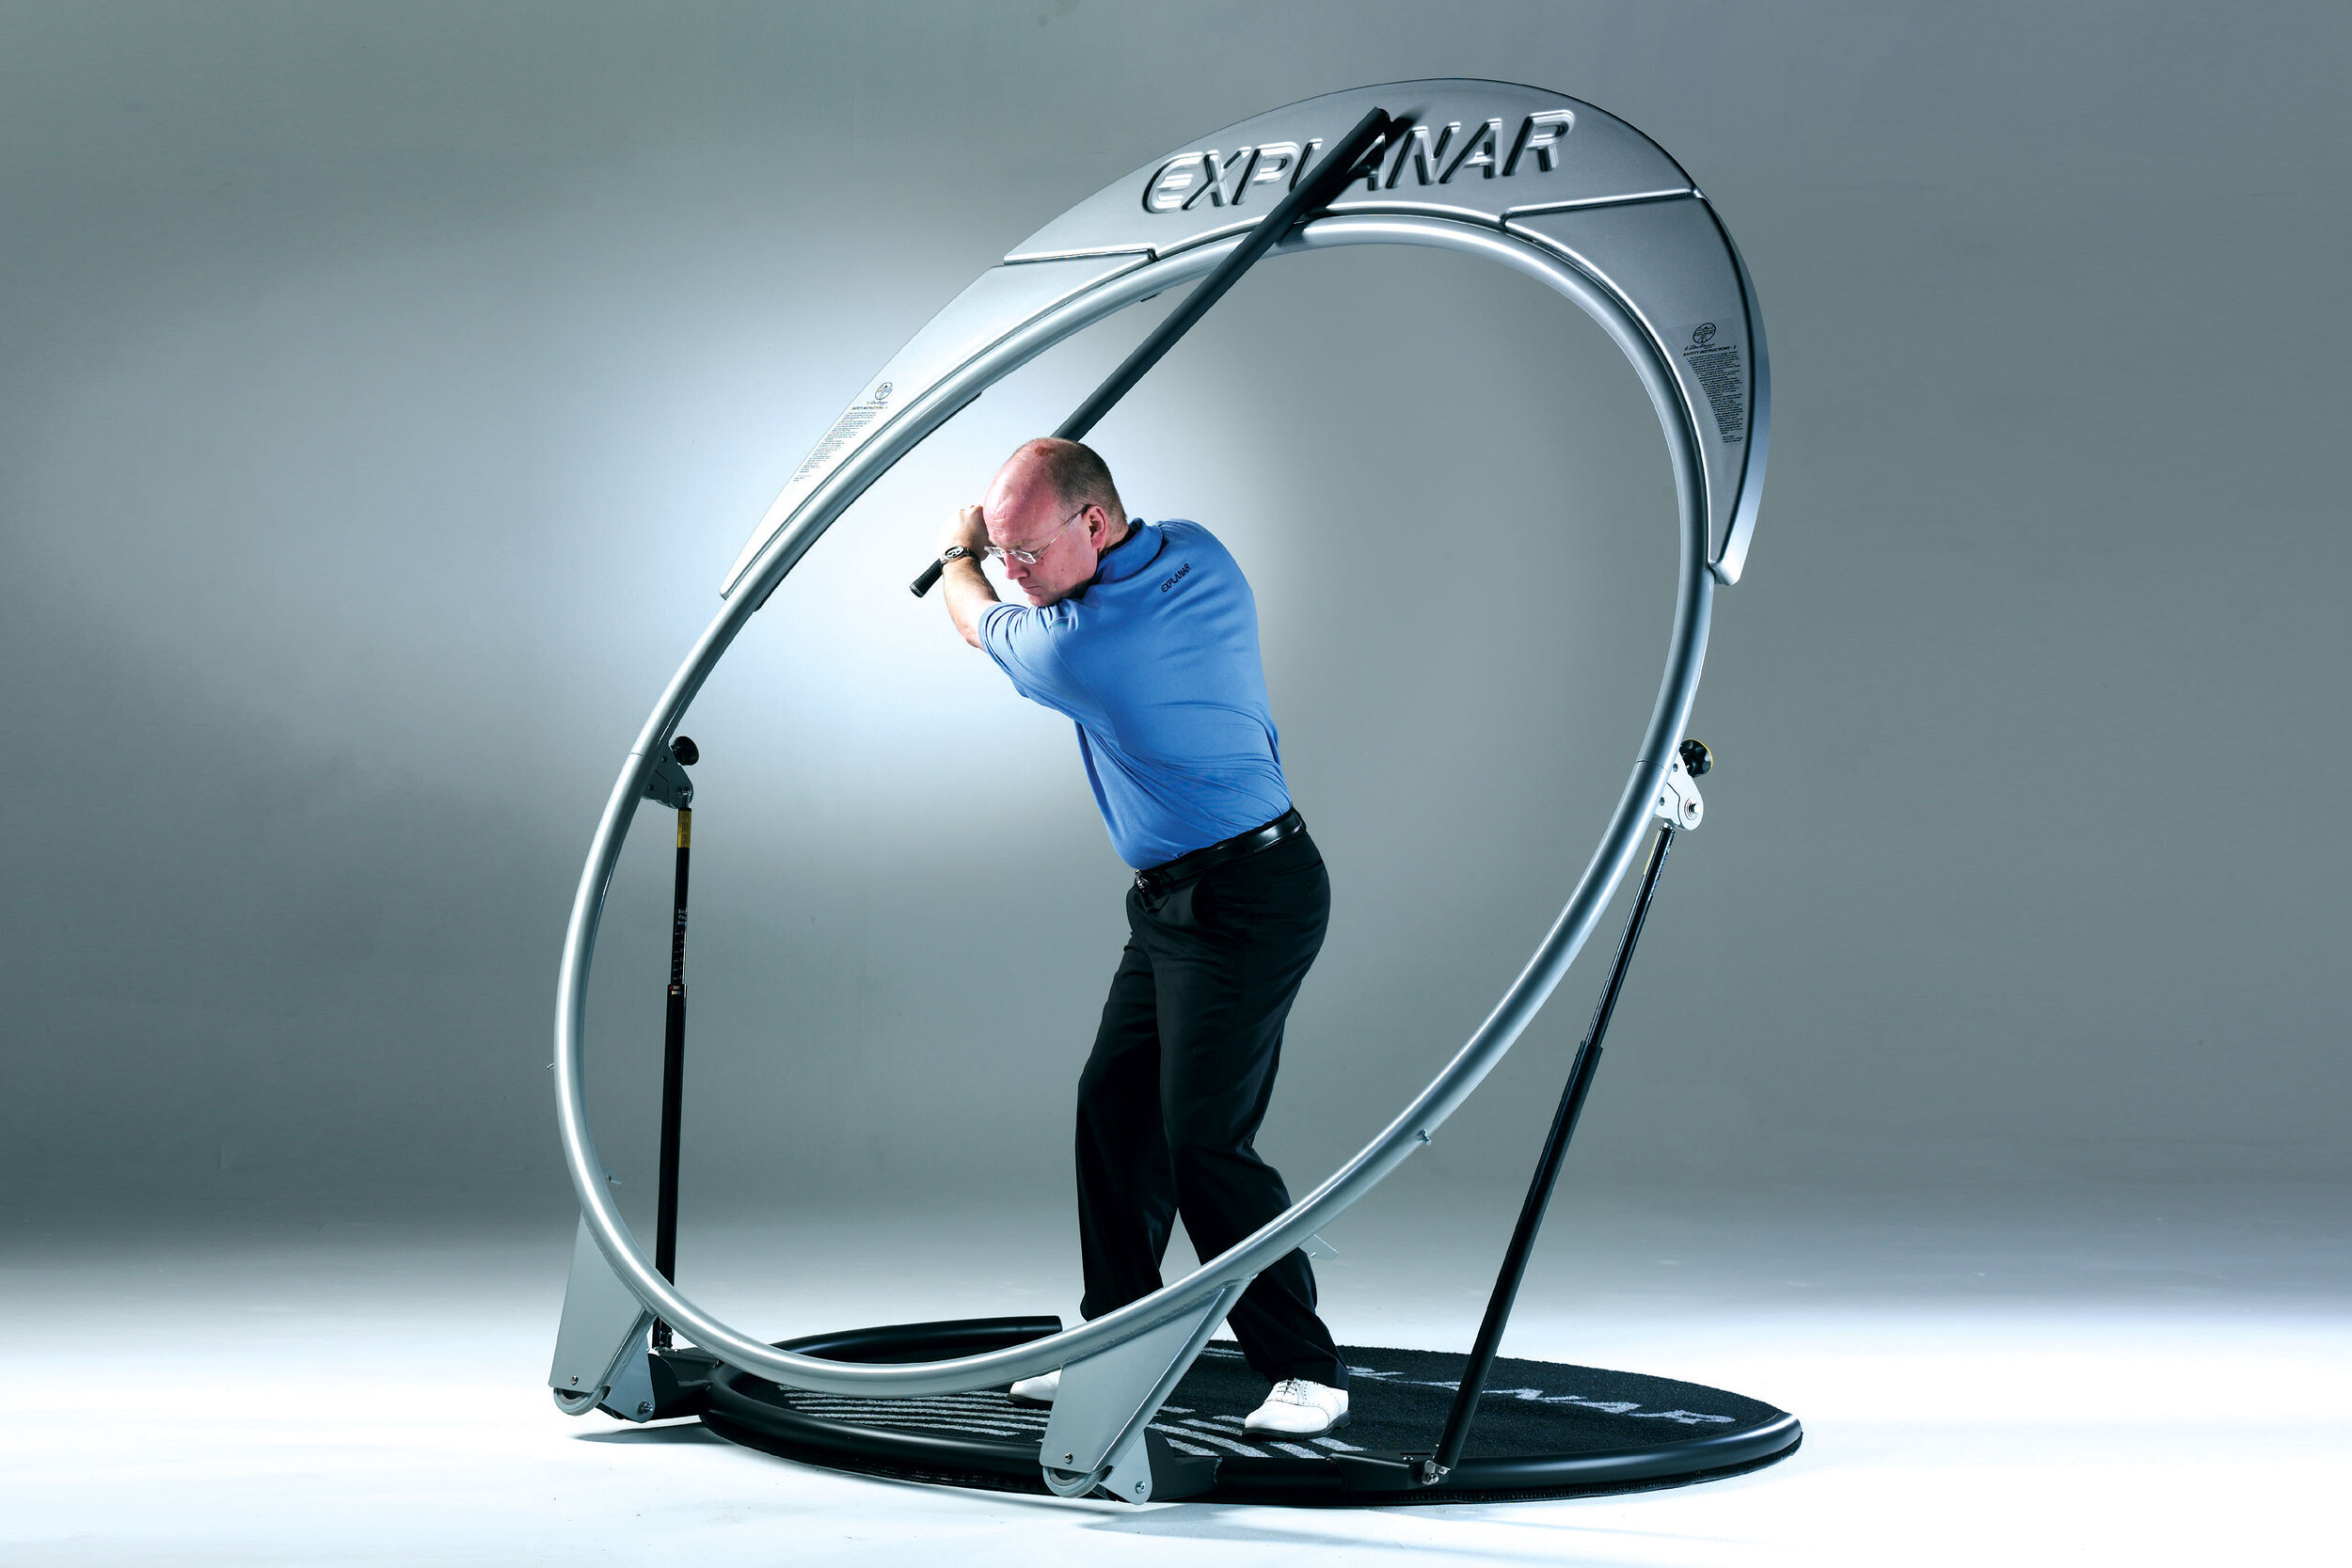 Explanar - Your shortcut to a perfect swing